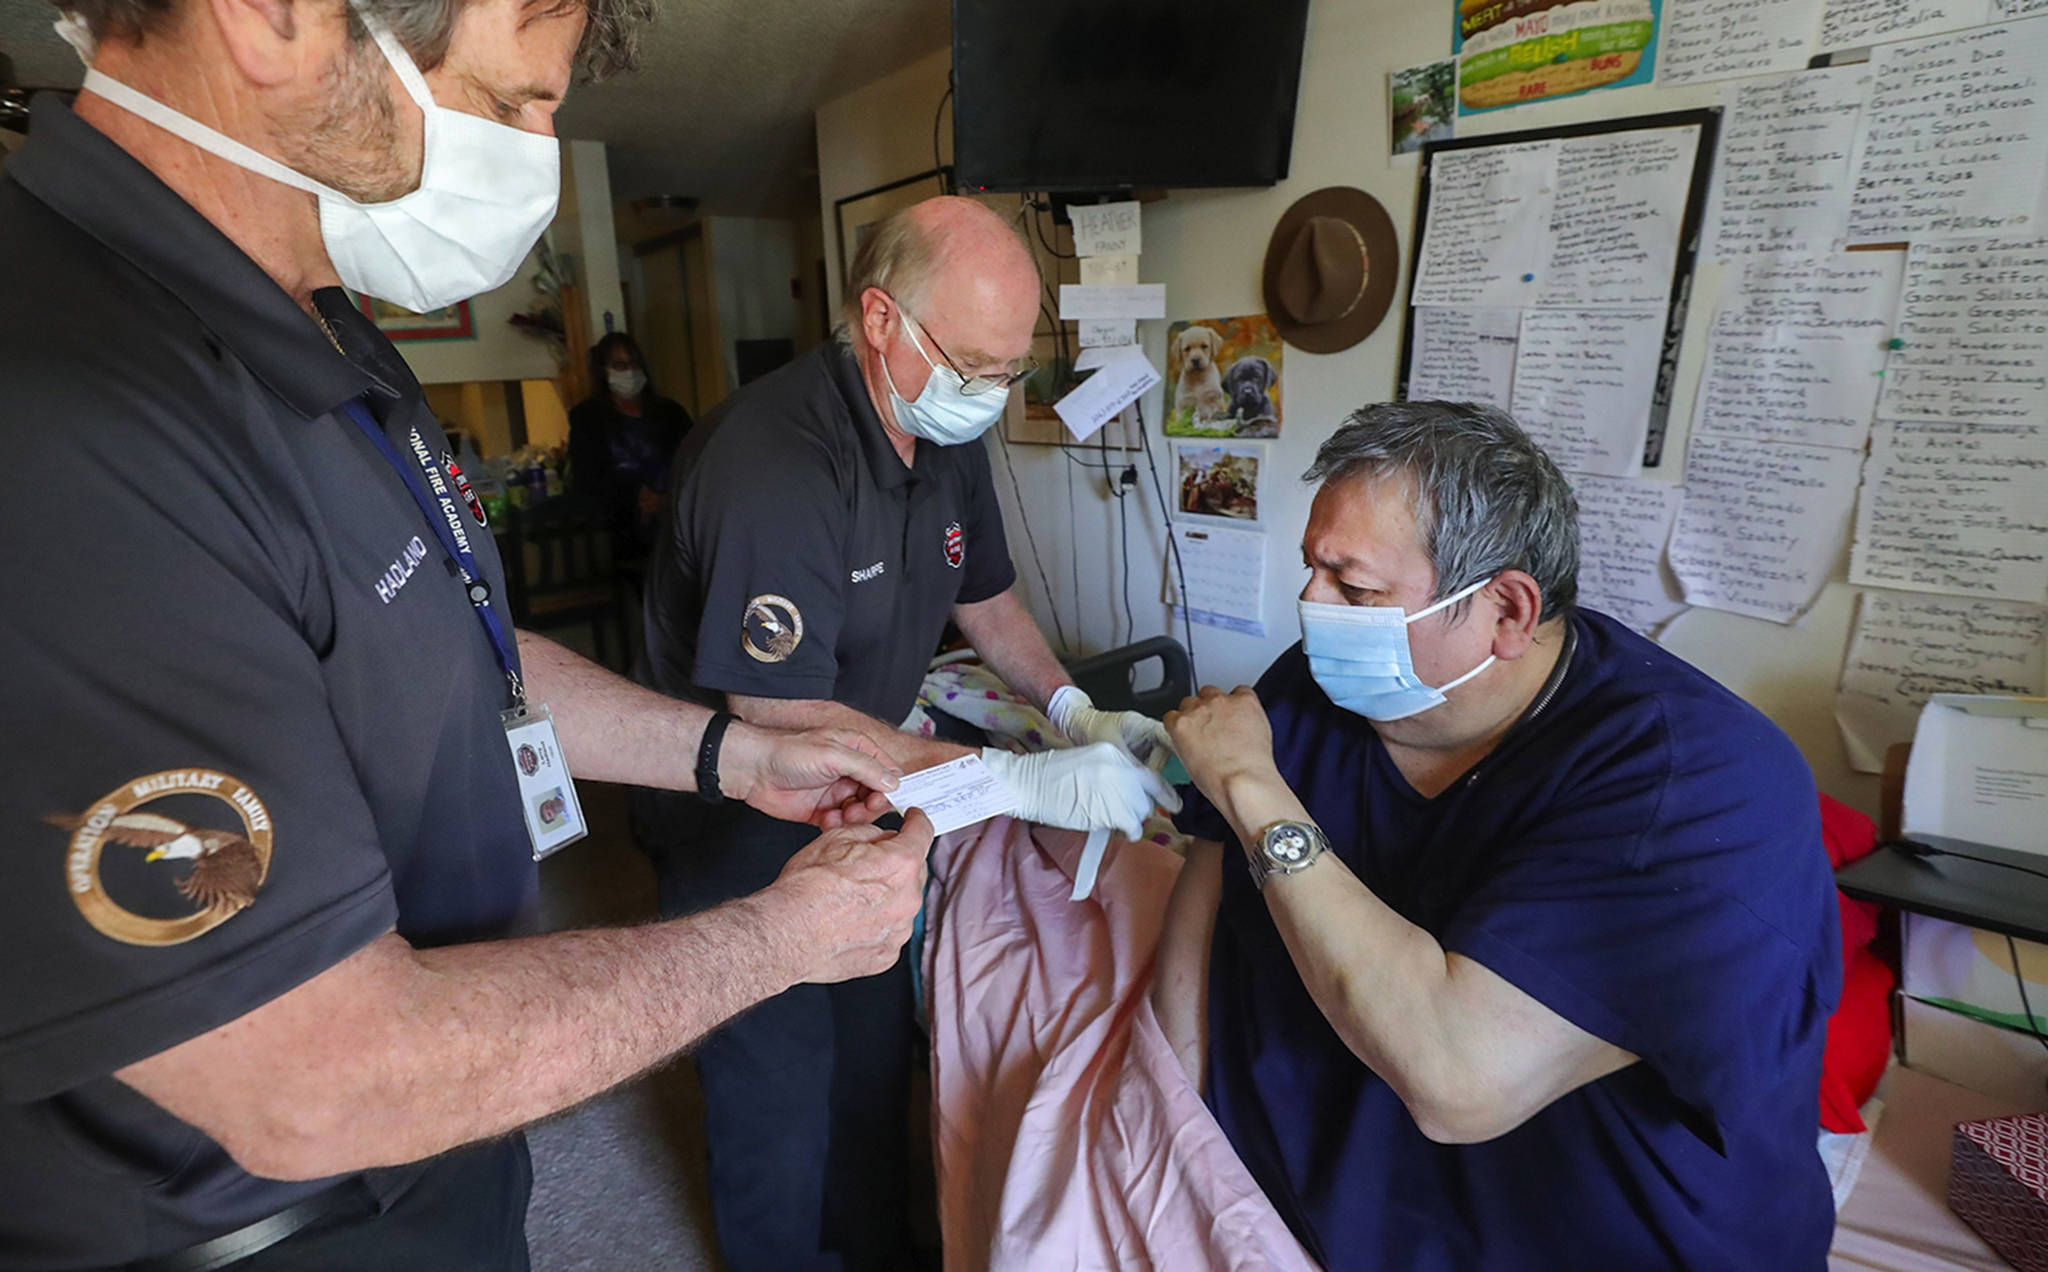 South County Fire paramedic Larry Hadland, left, hands a proof of vaccination card while emergency medical technician Kim Sharpe vaccinates Abel Cordova, 63, at his home on April 20, 2021. Cordova was unable to travel for a vaccination. Greg Gilbert |The Seattle Times